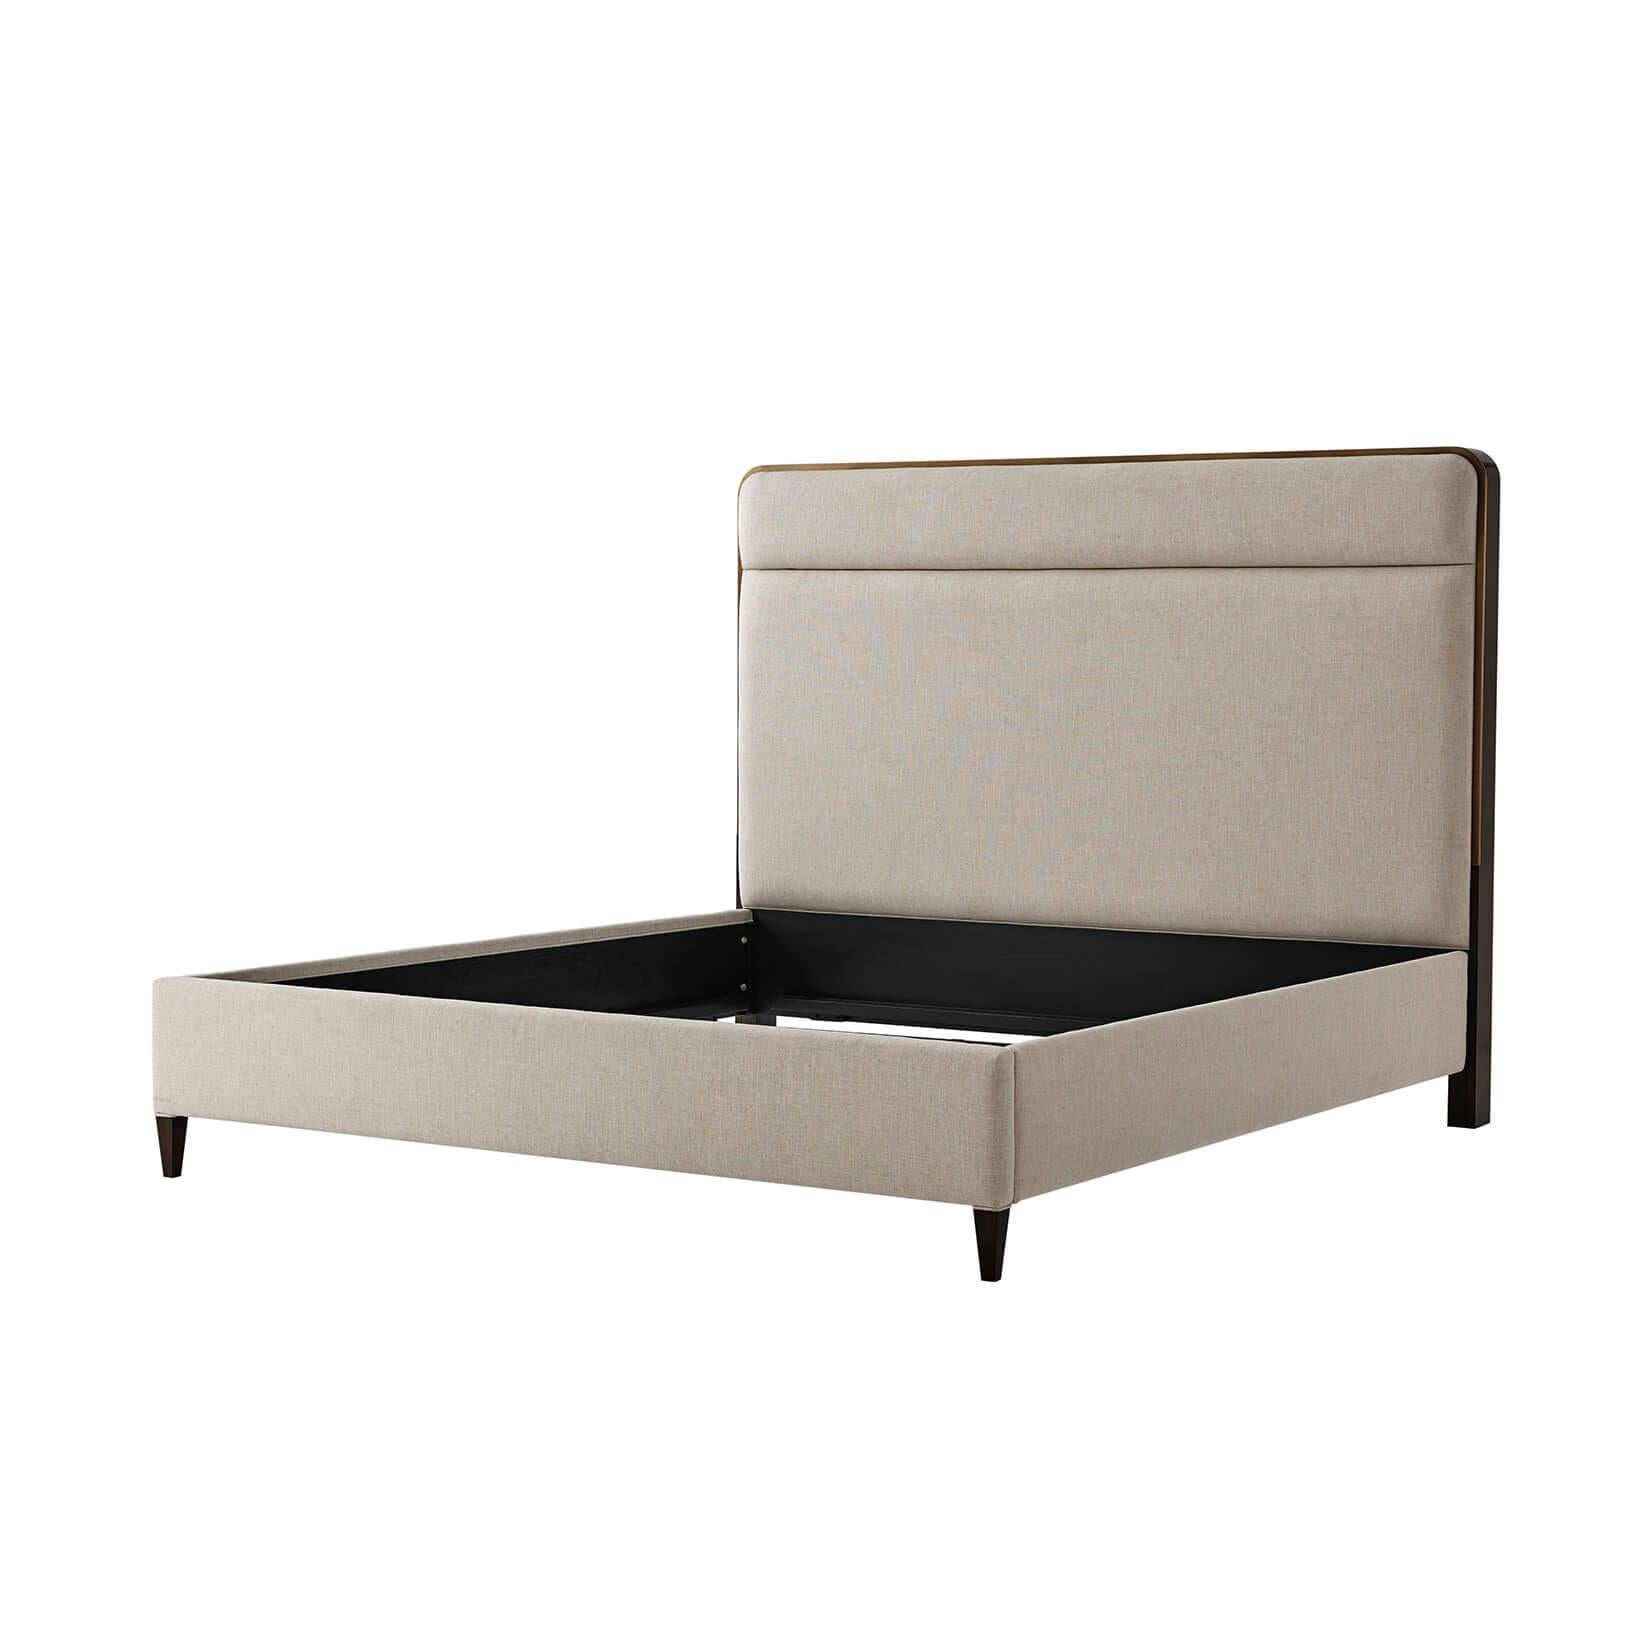 Modern Classic king size bed with brushed Pyrite finish headboard surround, upholstered headboard with a horizontal channel detail, upholstered rails and raised on square tapered legs.

Dimensions: 82.25